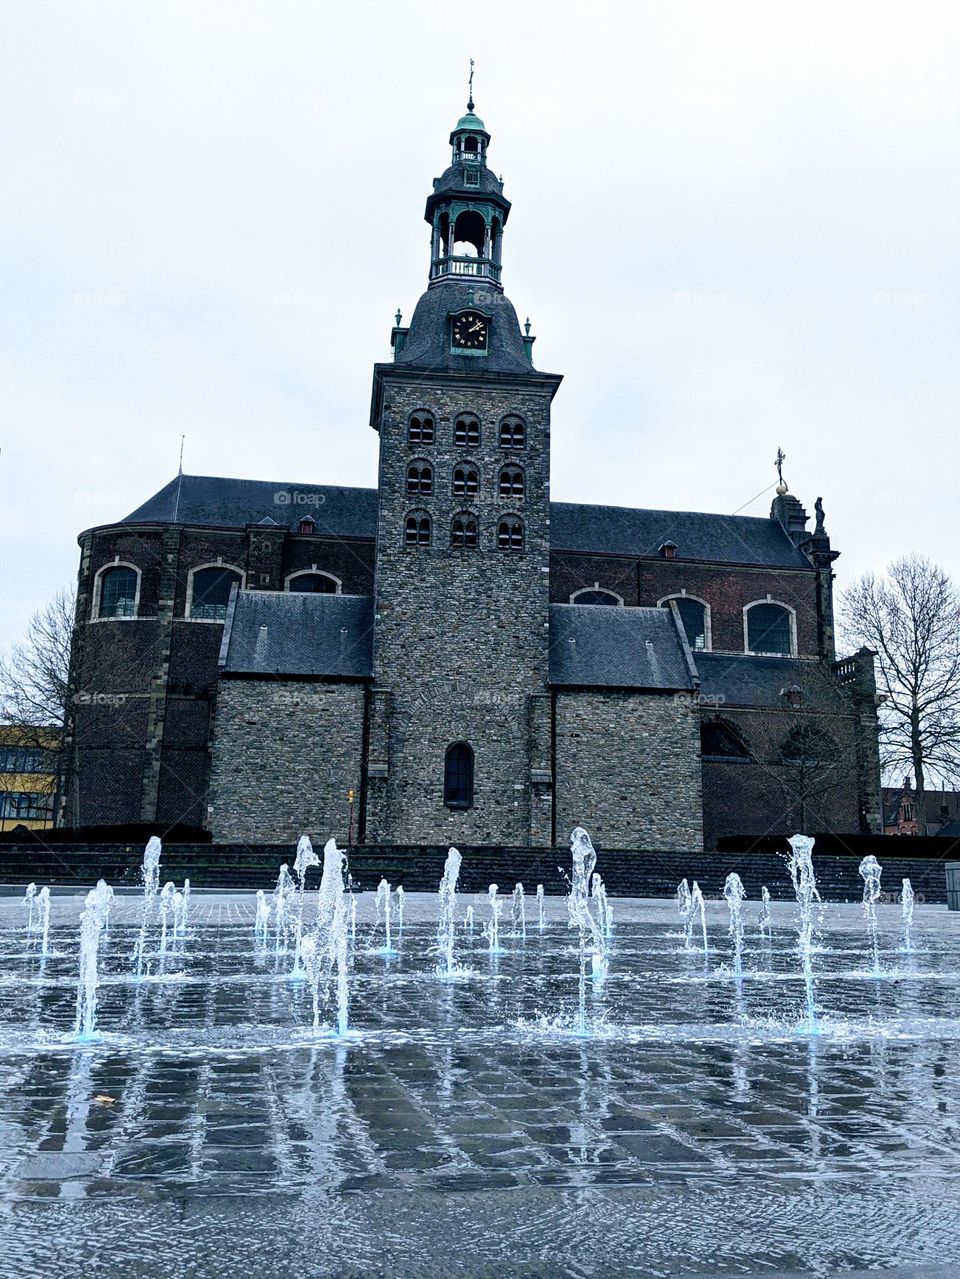 Water fountain on a public square in front of a church